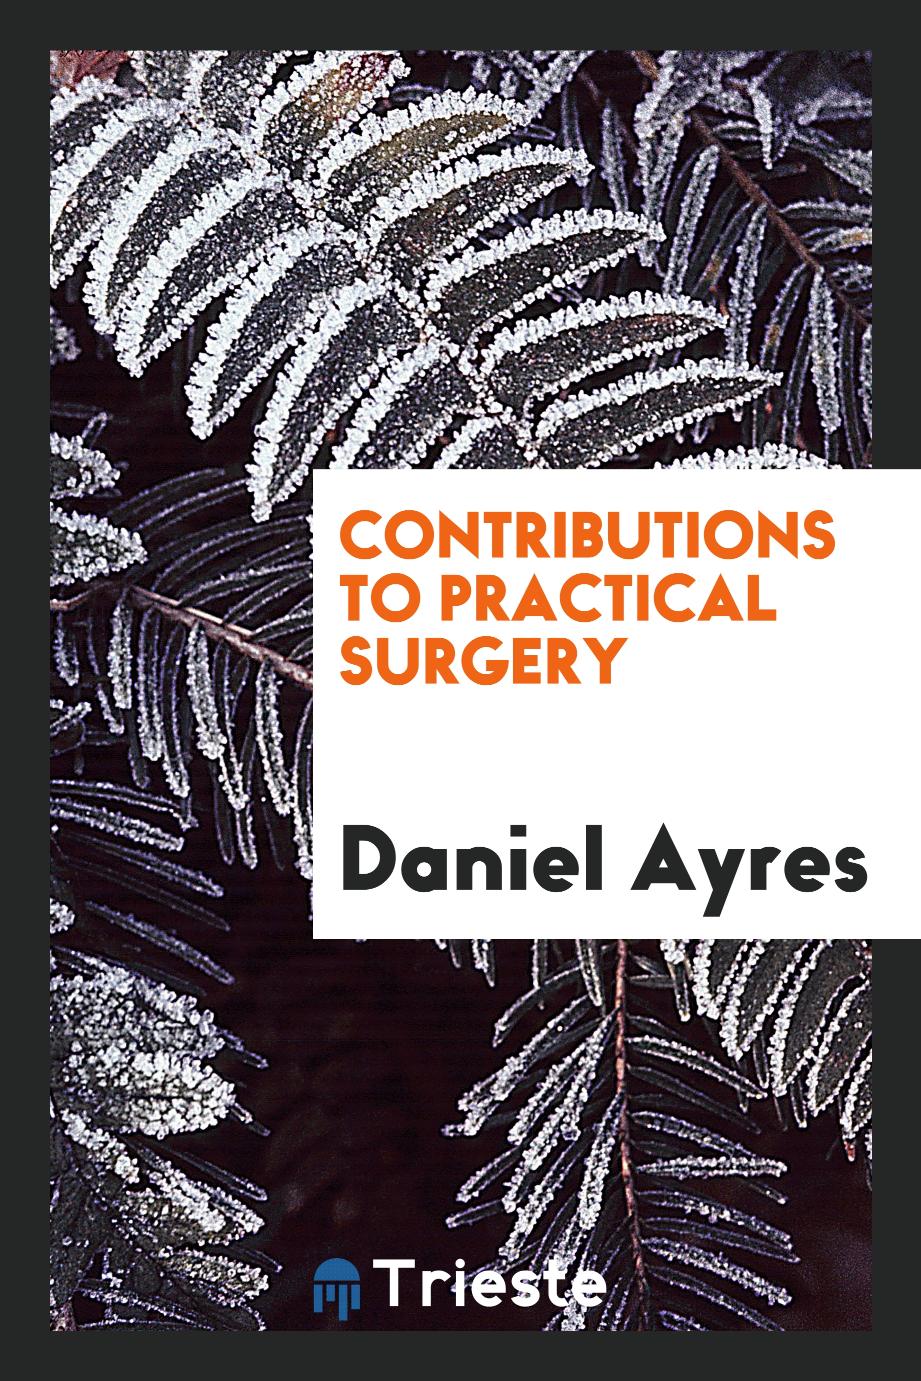 Contributions to practical surgery